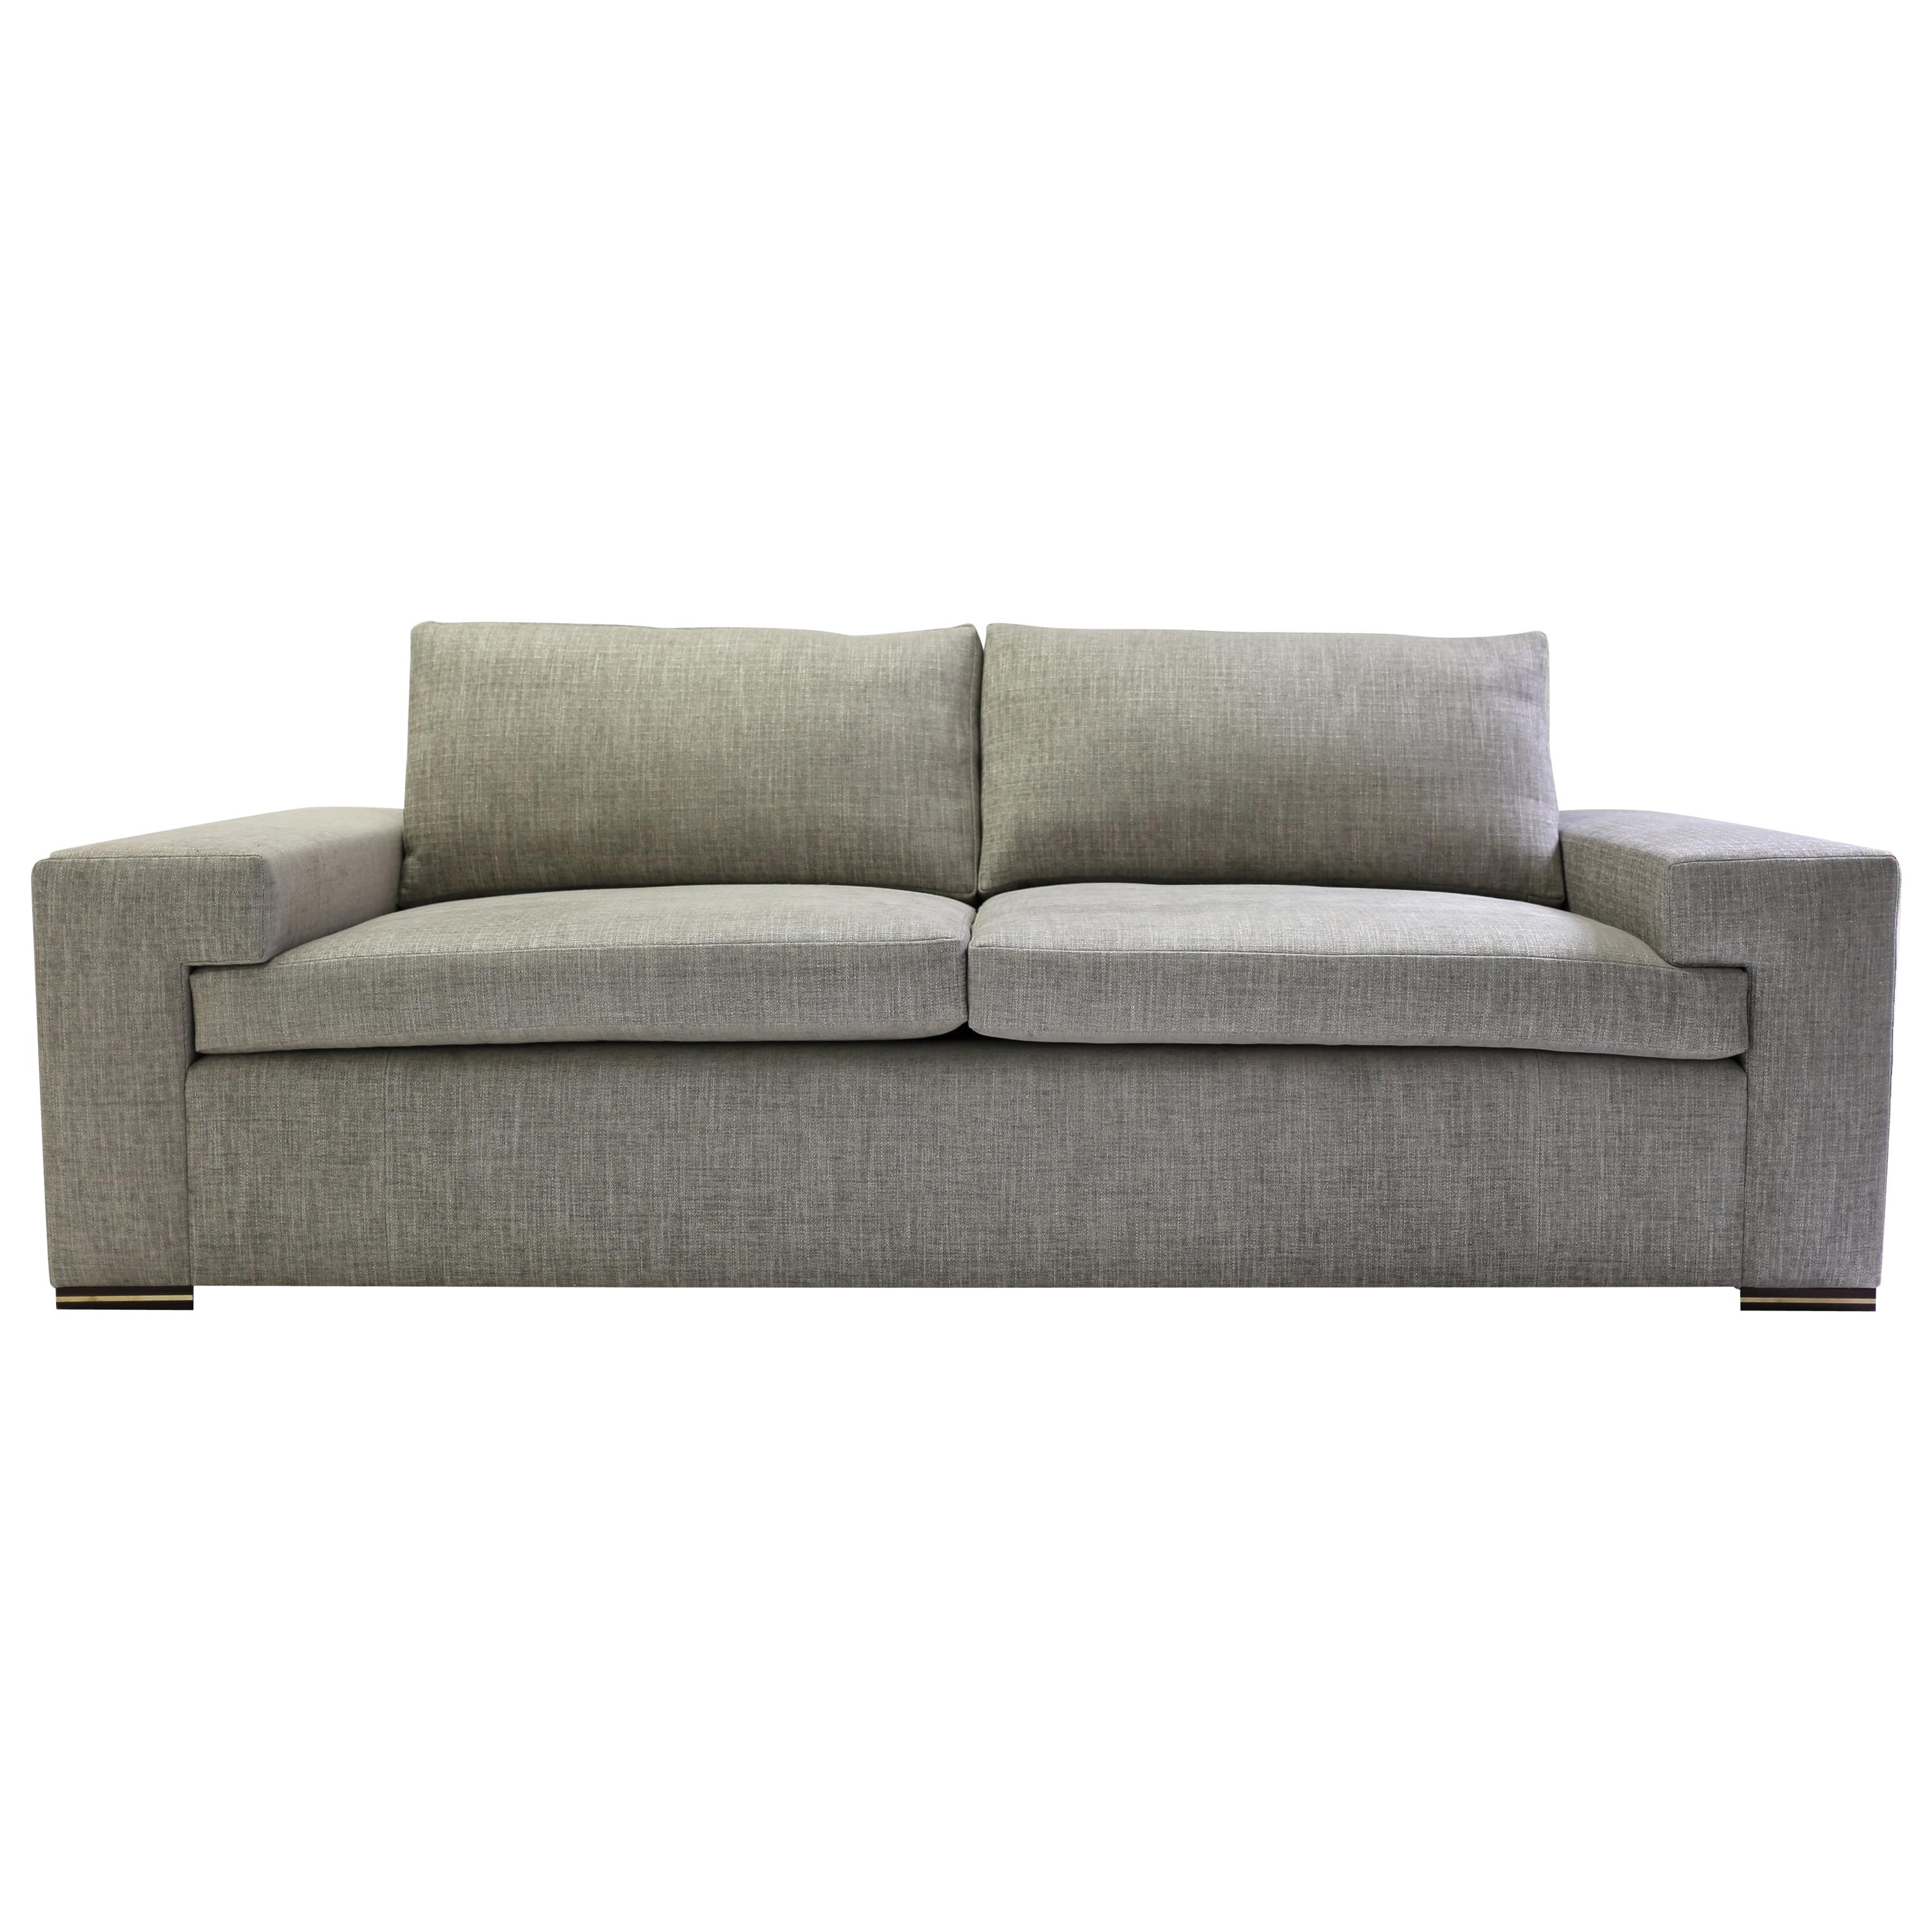 Modern Large Sofa with Large Pull Out Table and Metal Details on Wood Legs For Sale